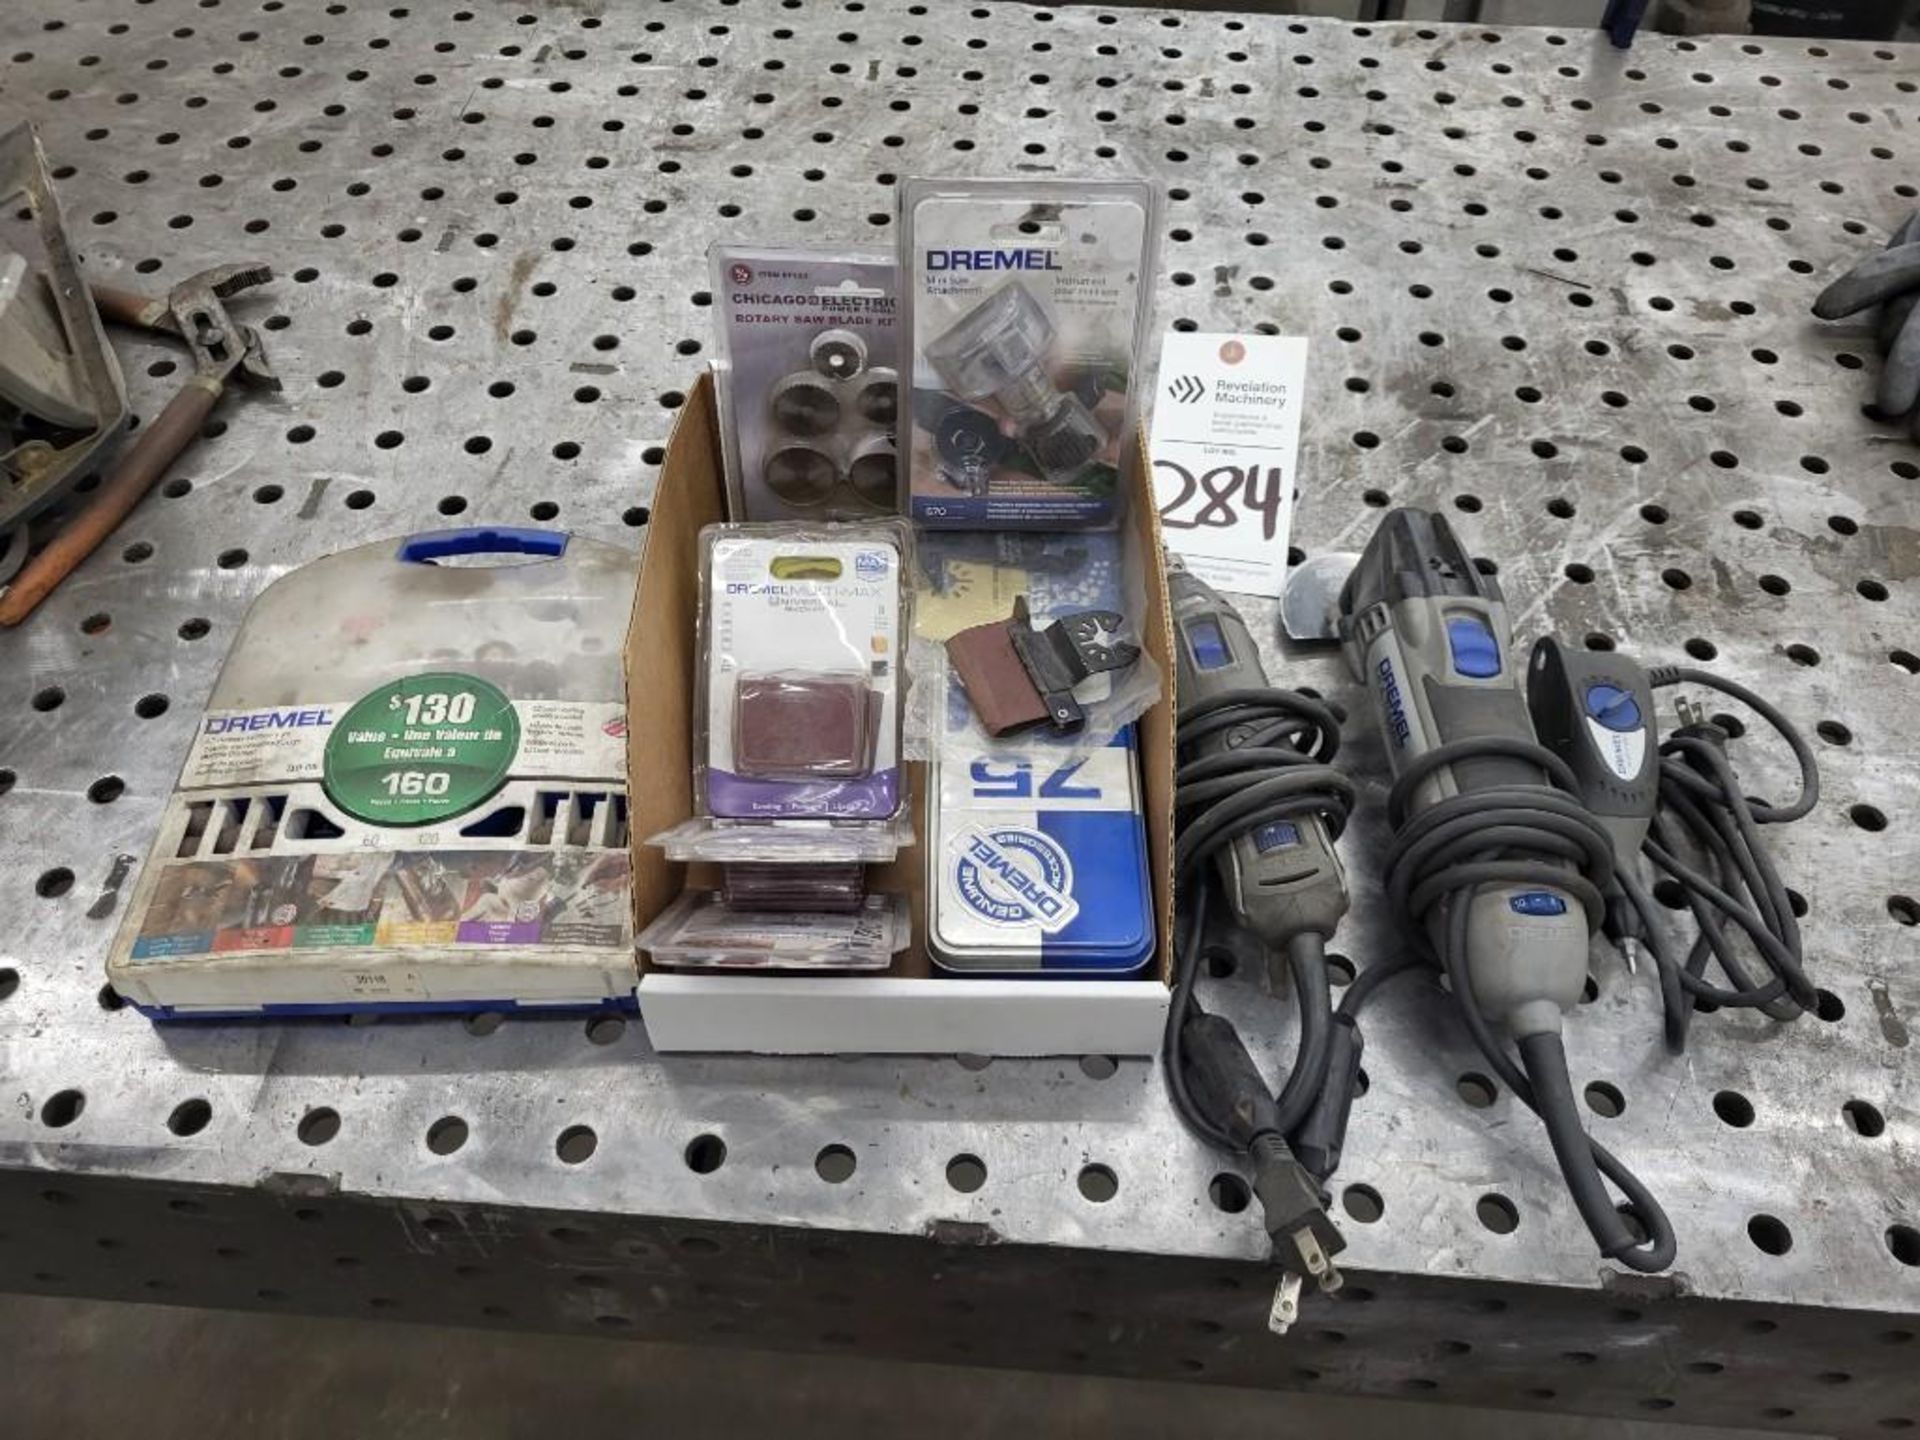 LOT OF DREMEL TOOLS; ATTACHMENTS AND TOOLING